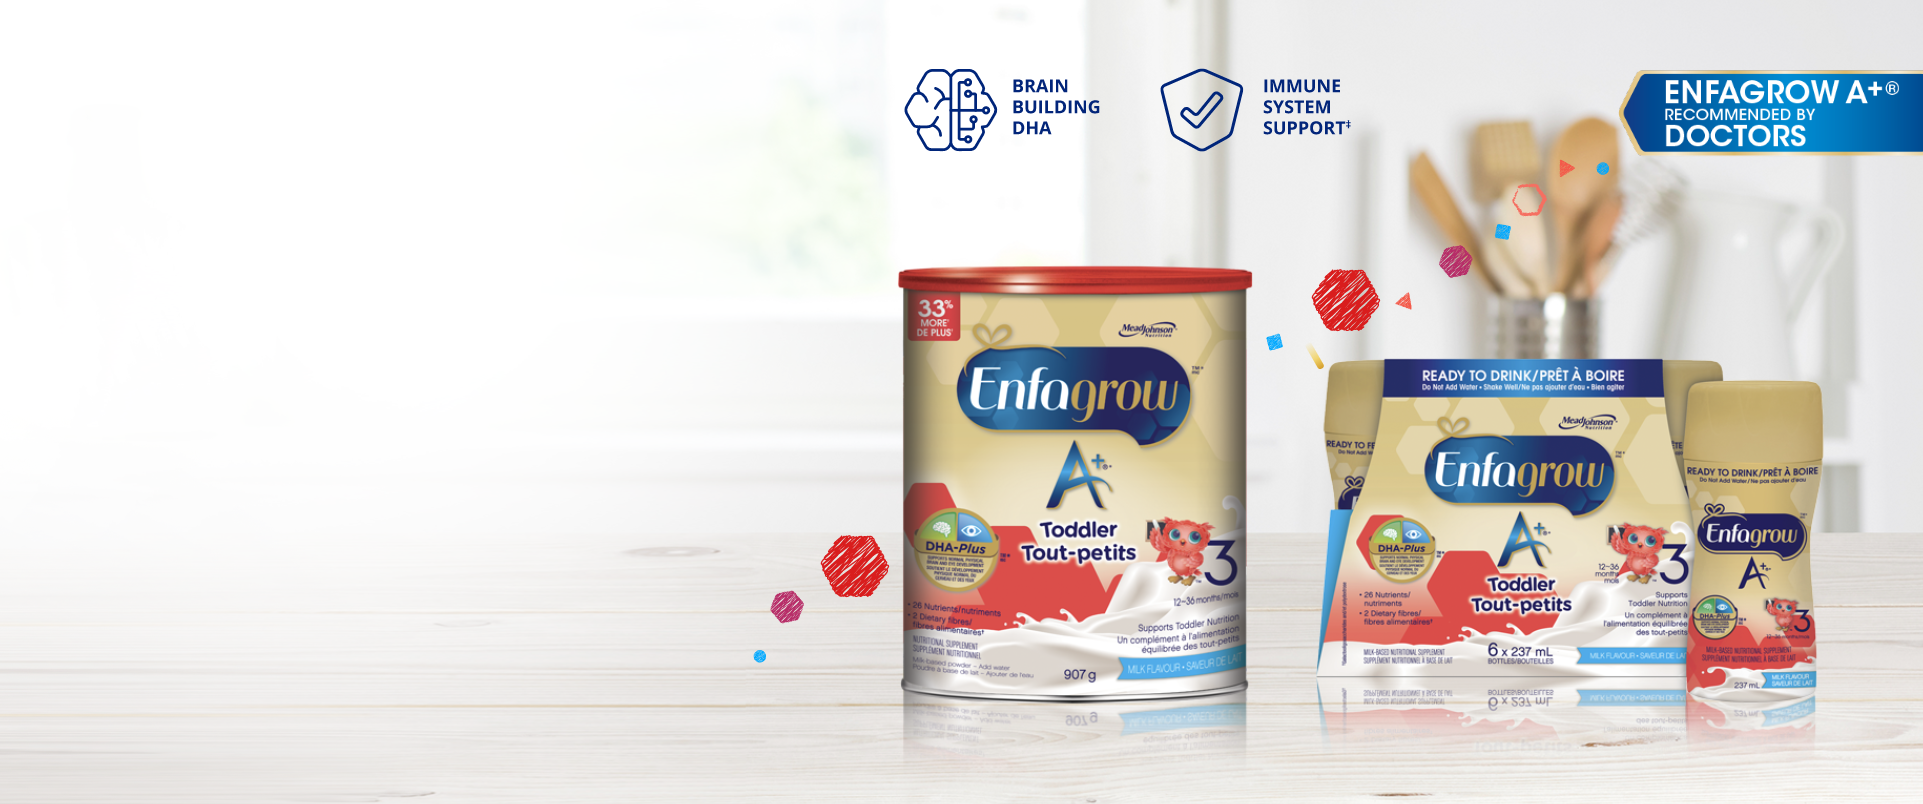 Sign Up For a FREE Sample of Enfagrow A+®!